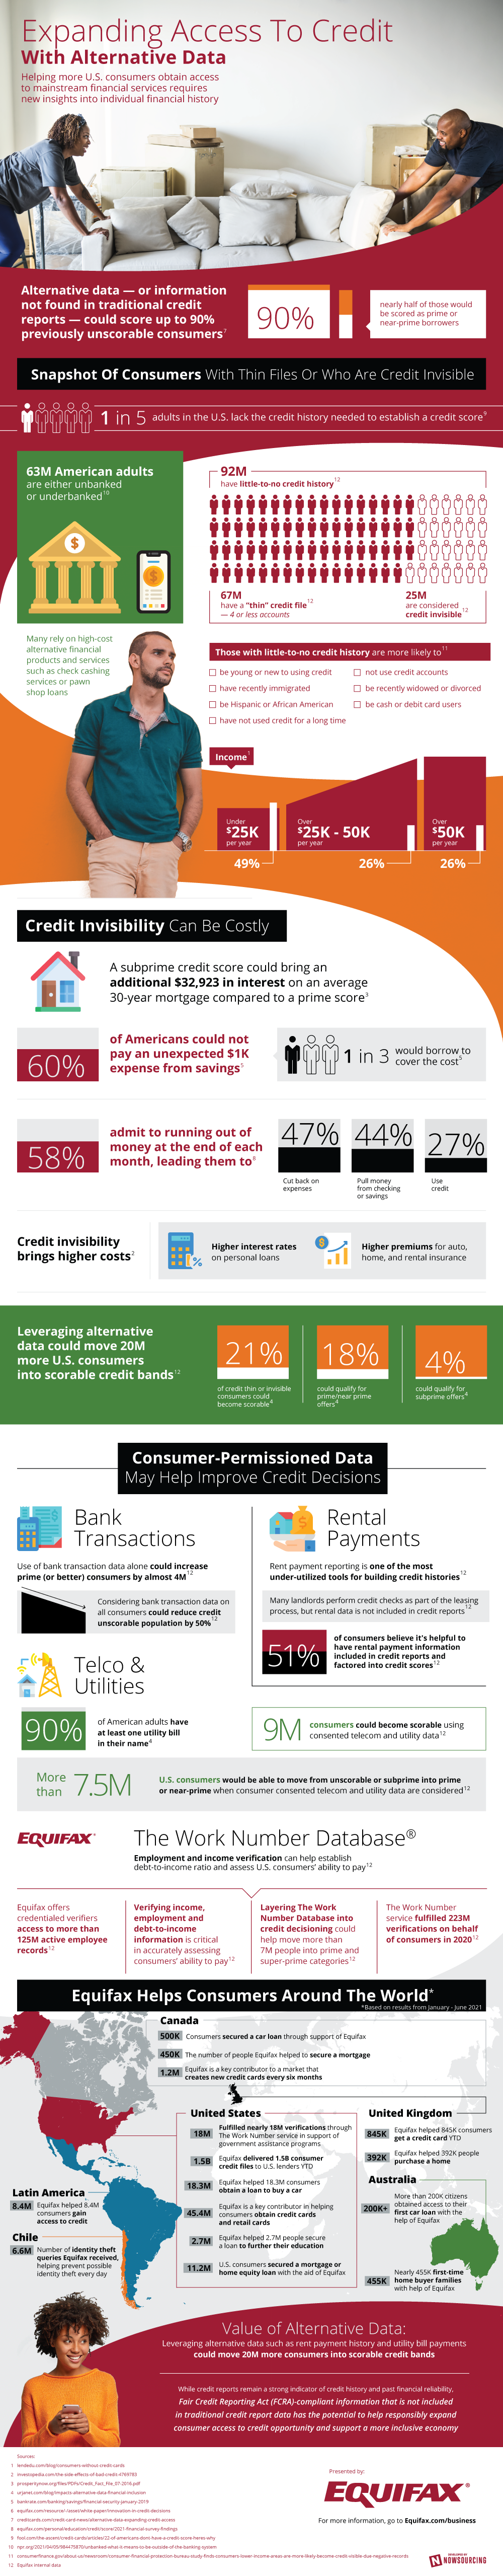 Fixing the Credit Score Problem [Infographic]